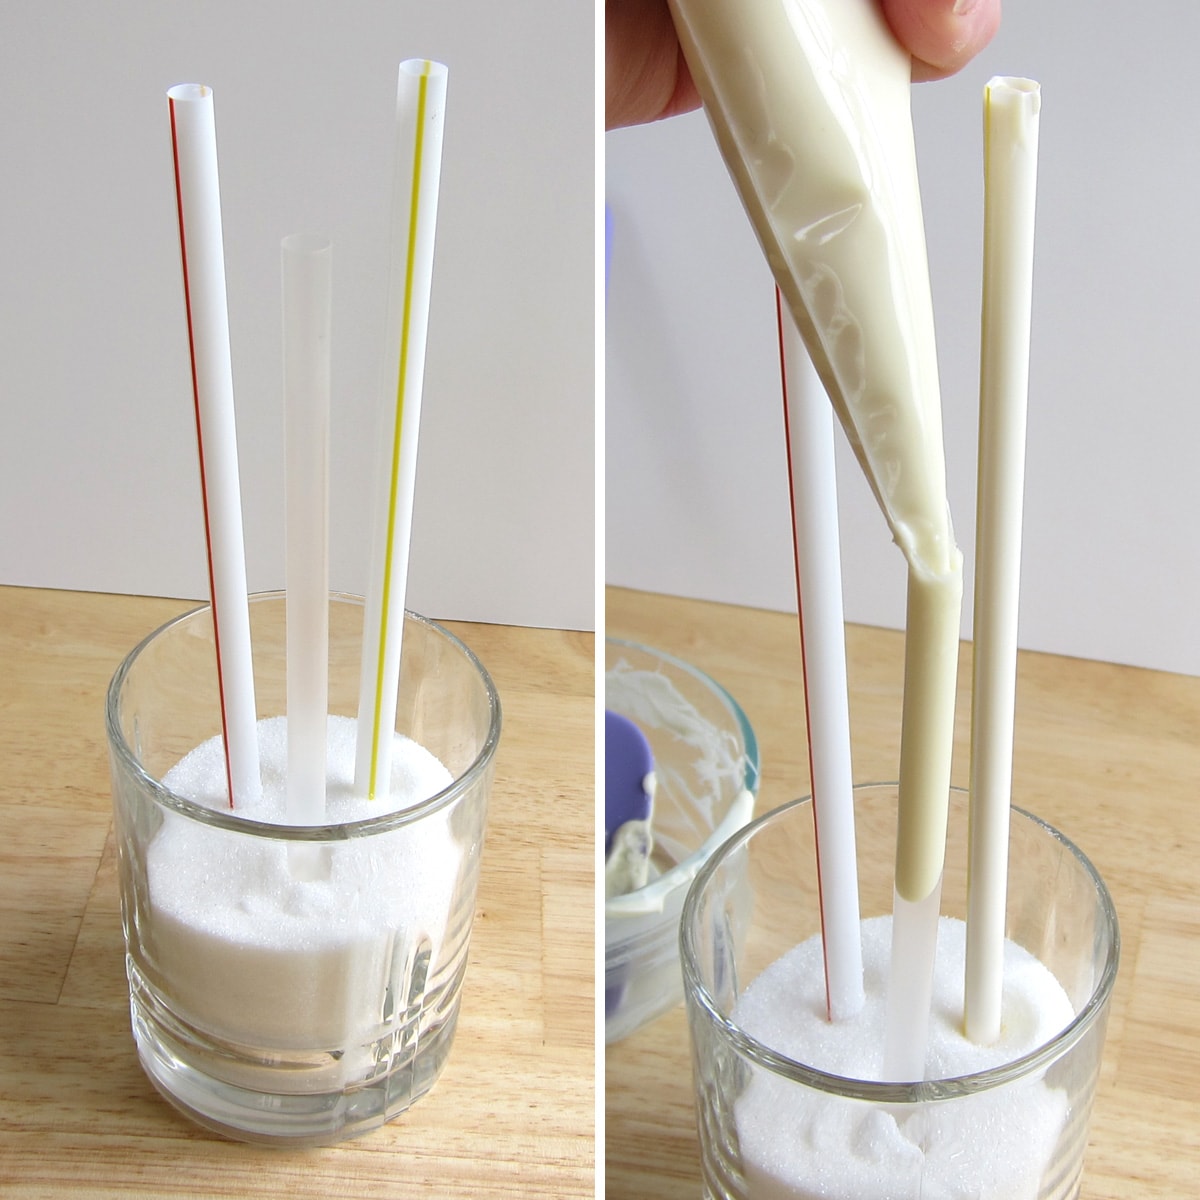 making white chocolate chalk by piping white chocolate into straws. 